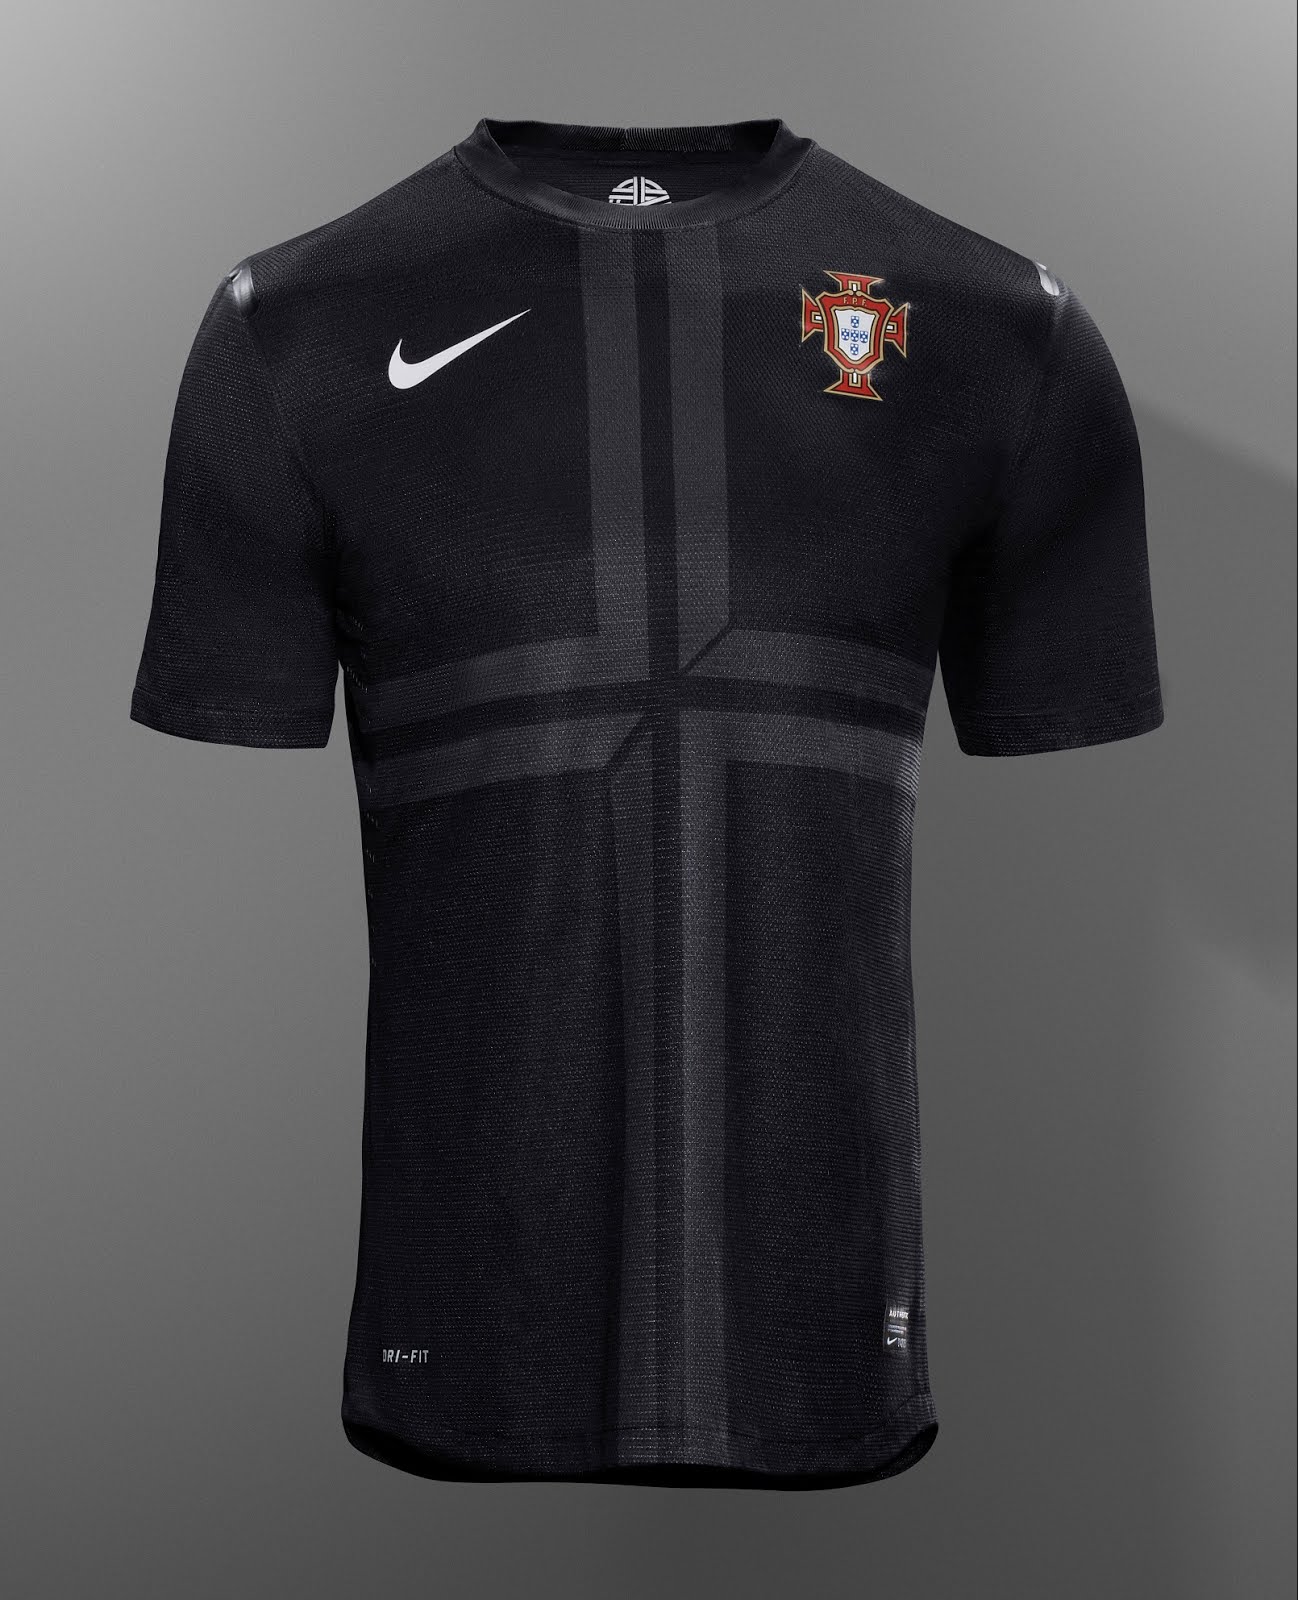 Download Super Punch: New Portugal soccer jersey by Nike